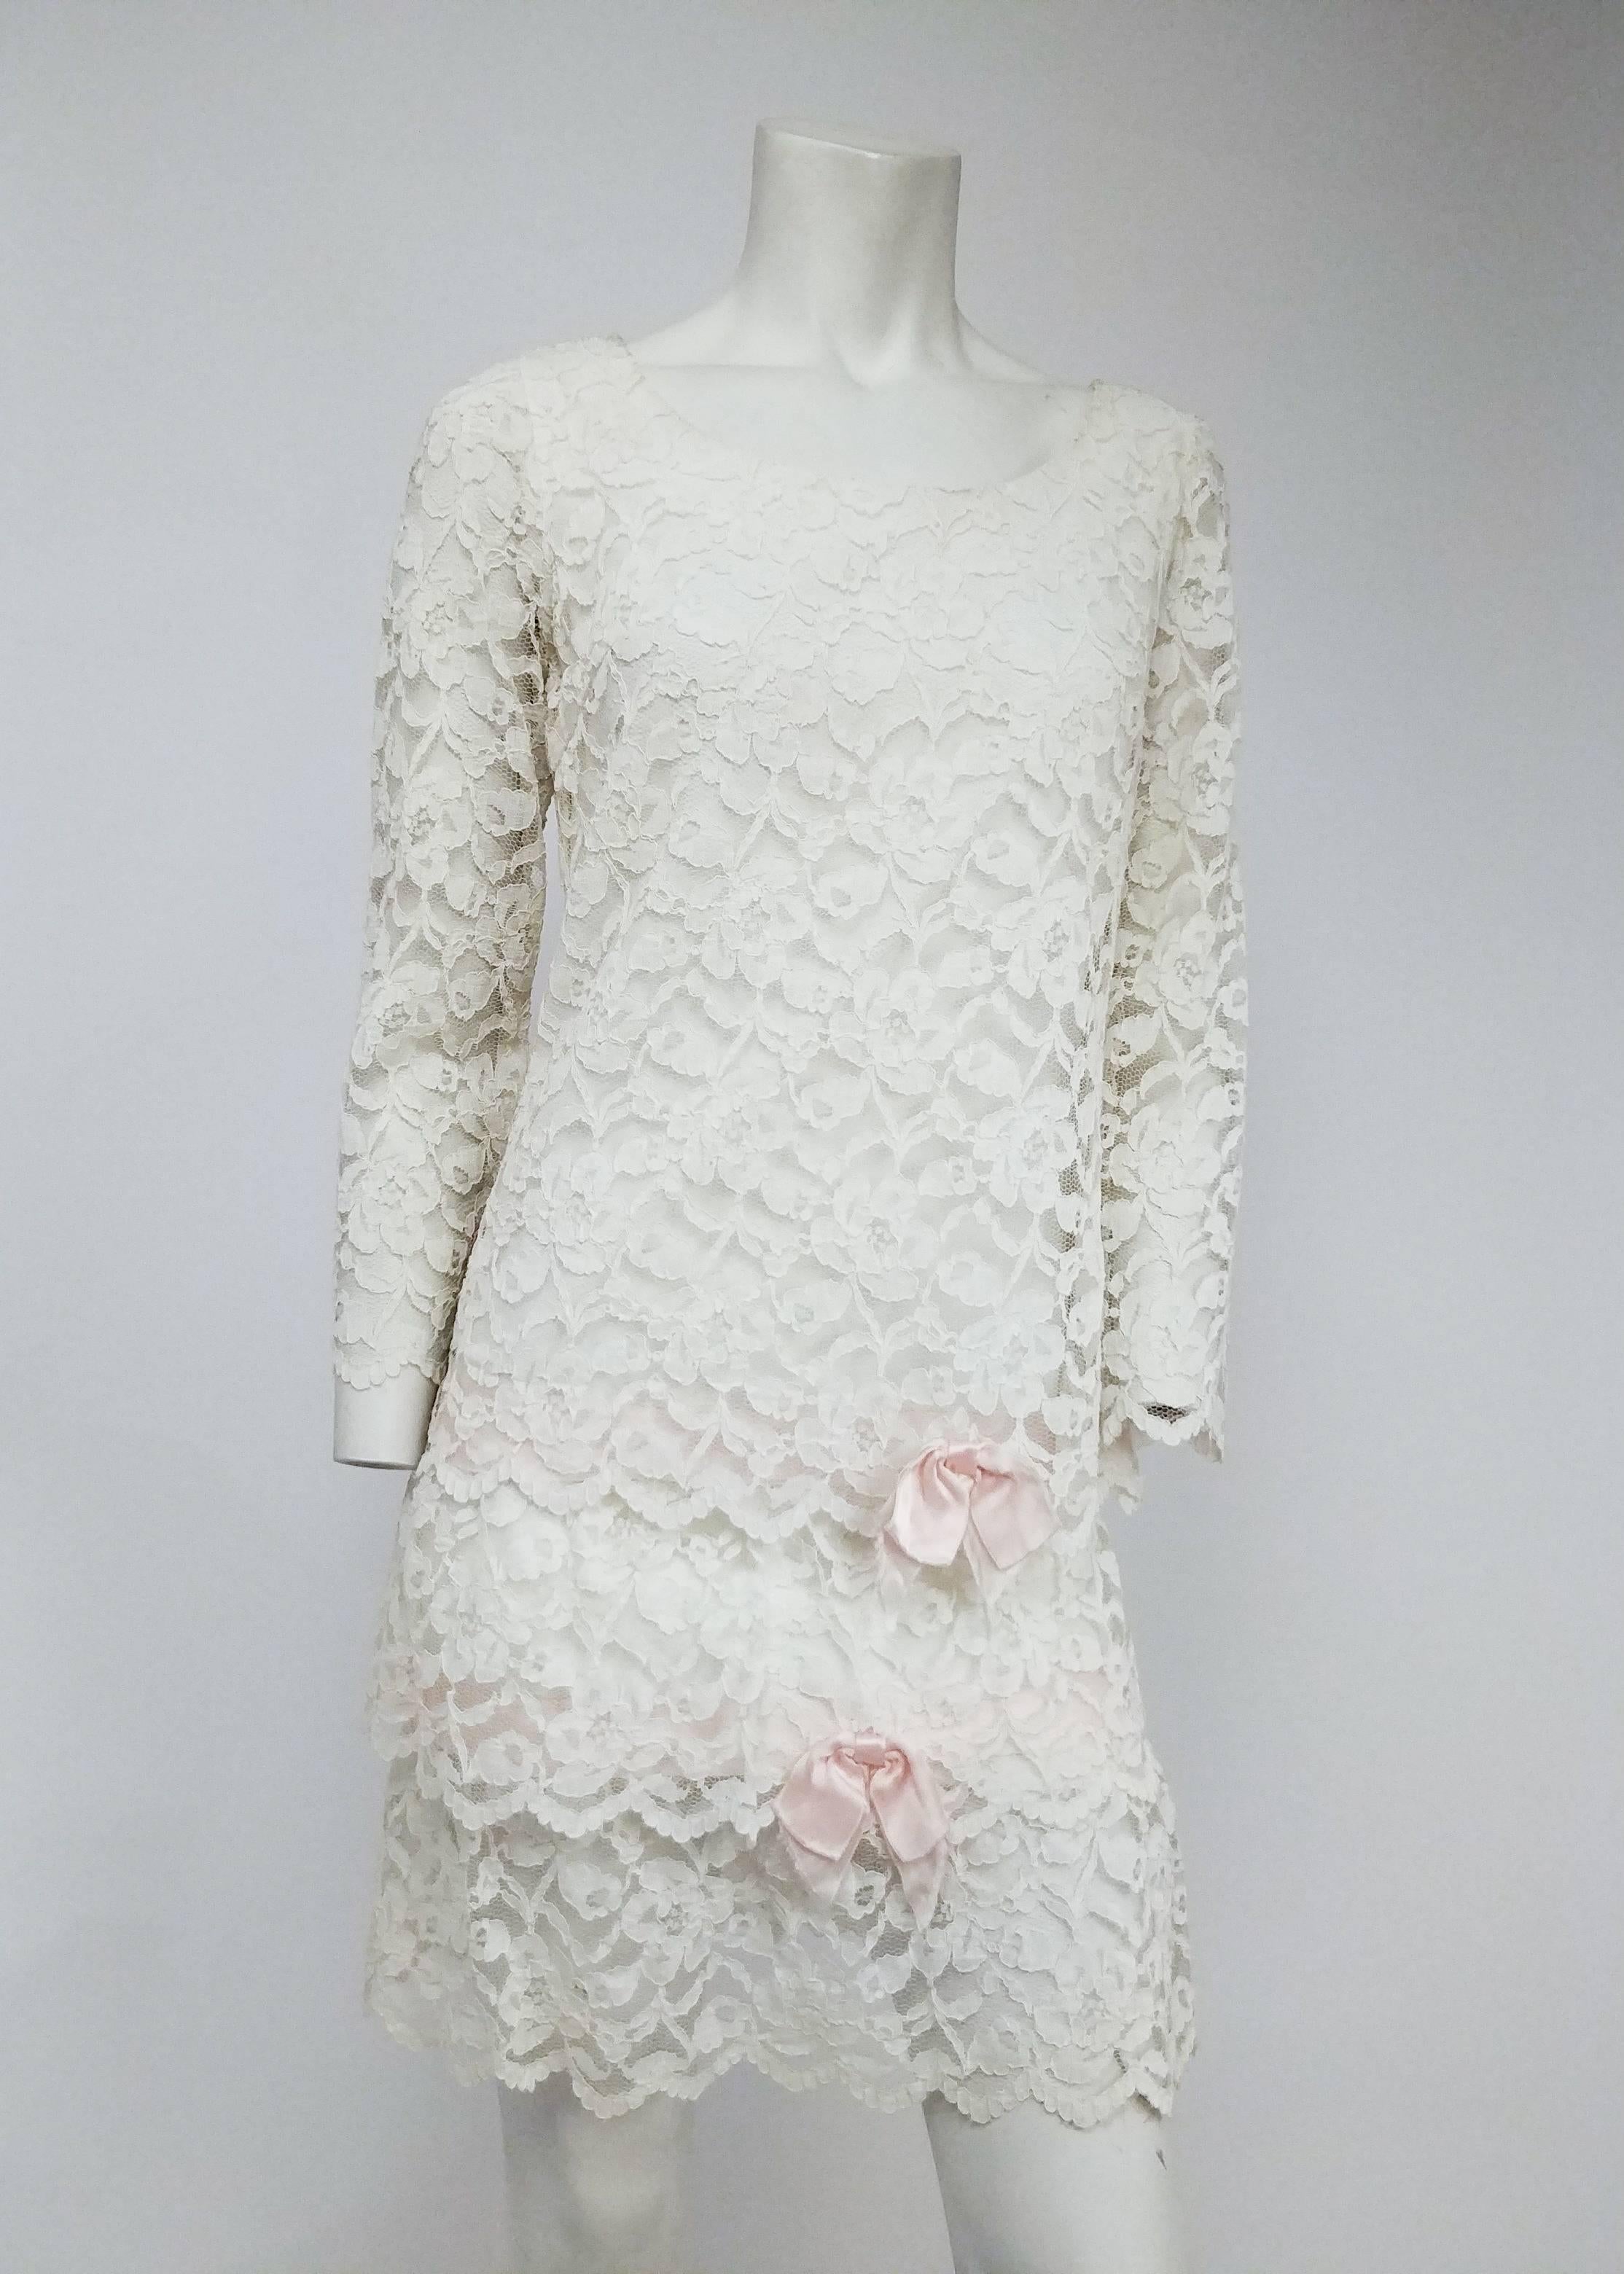 1960s Lace Drop Waist Dress. White lace dress with 3/4 sleeves and tiered skirt embellished with pink ribbon bows.  